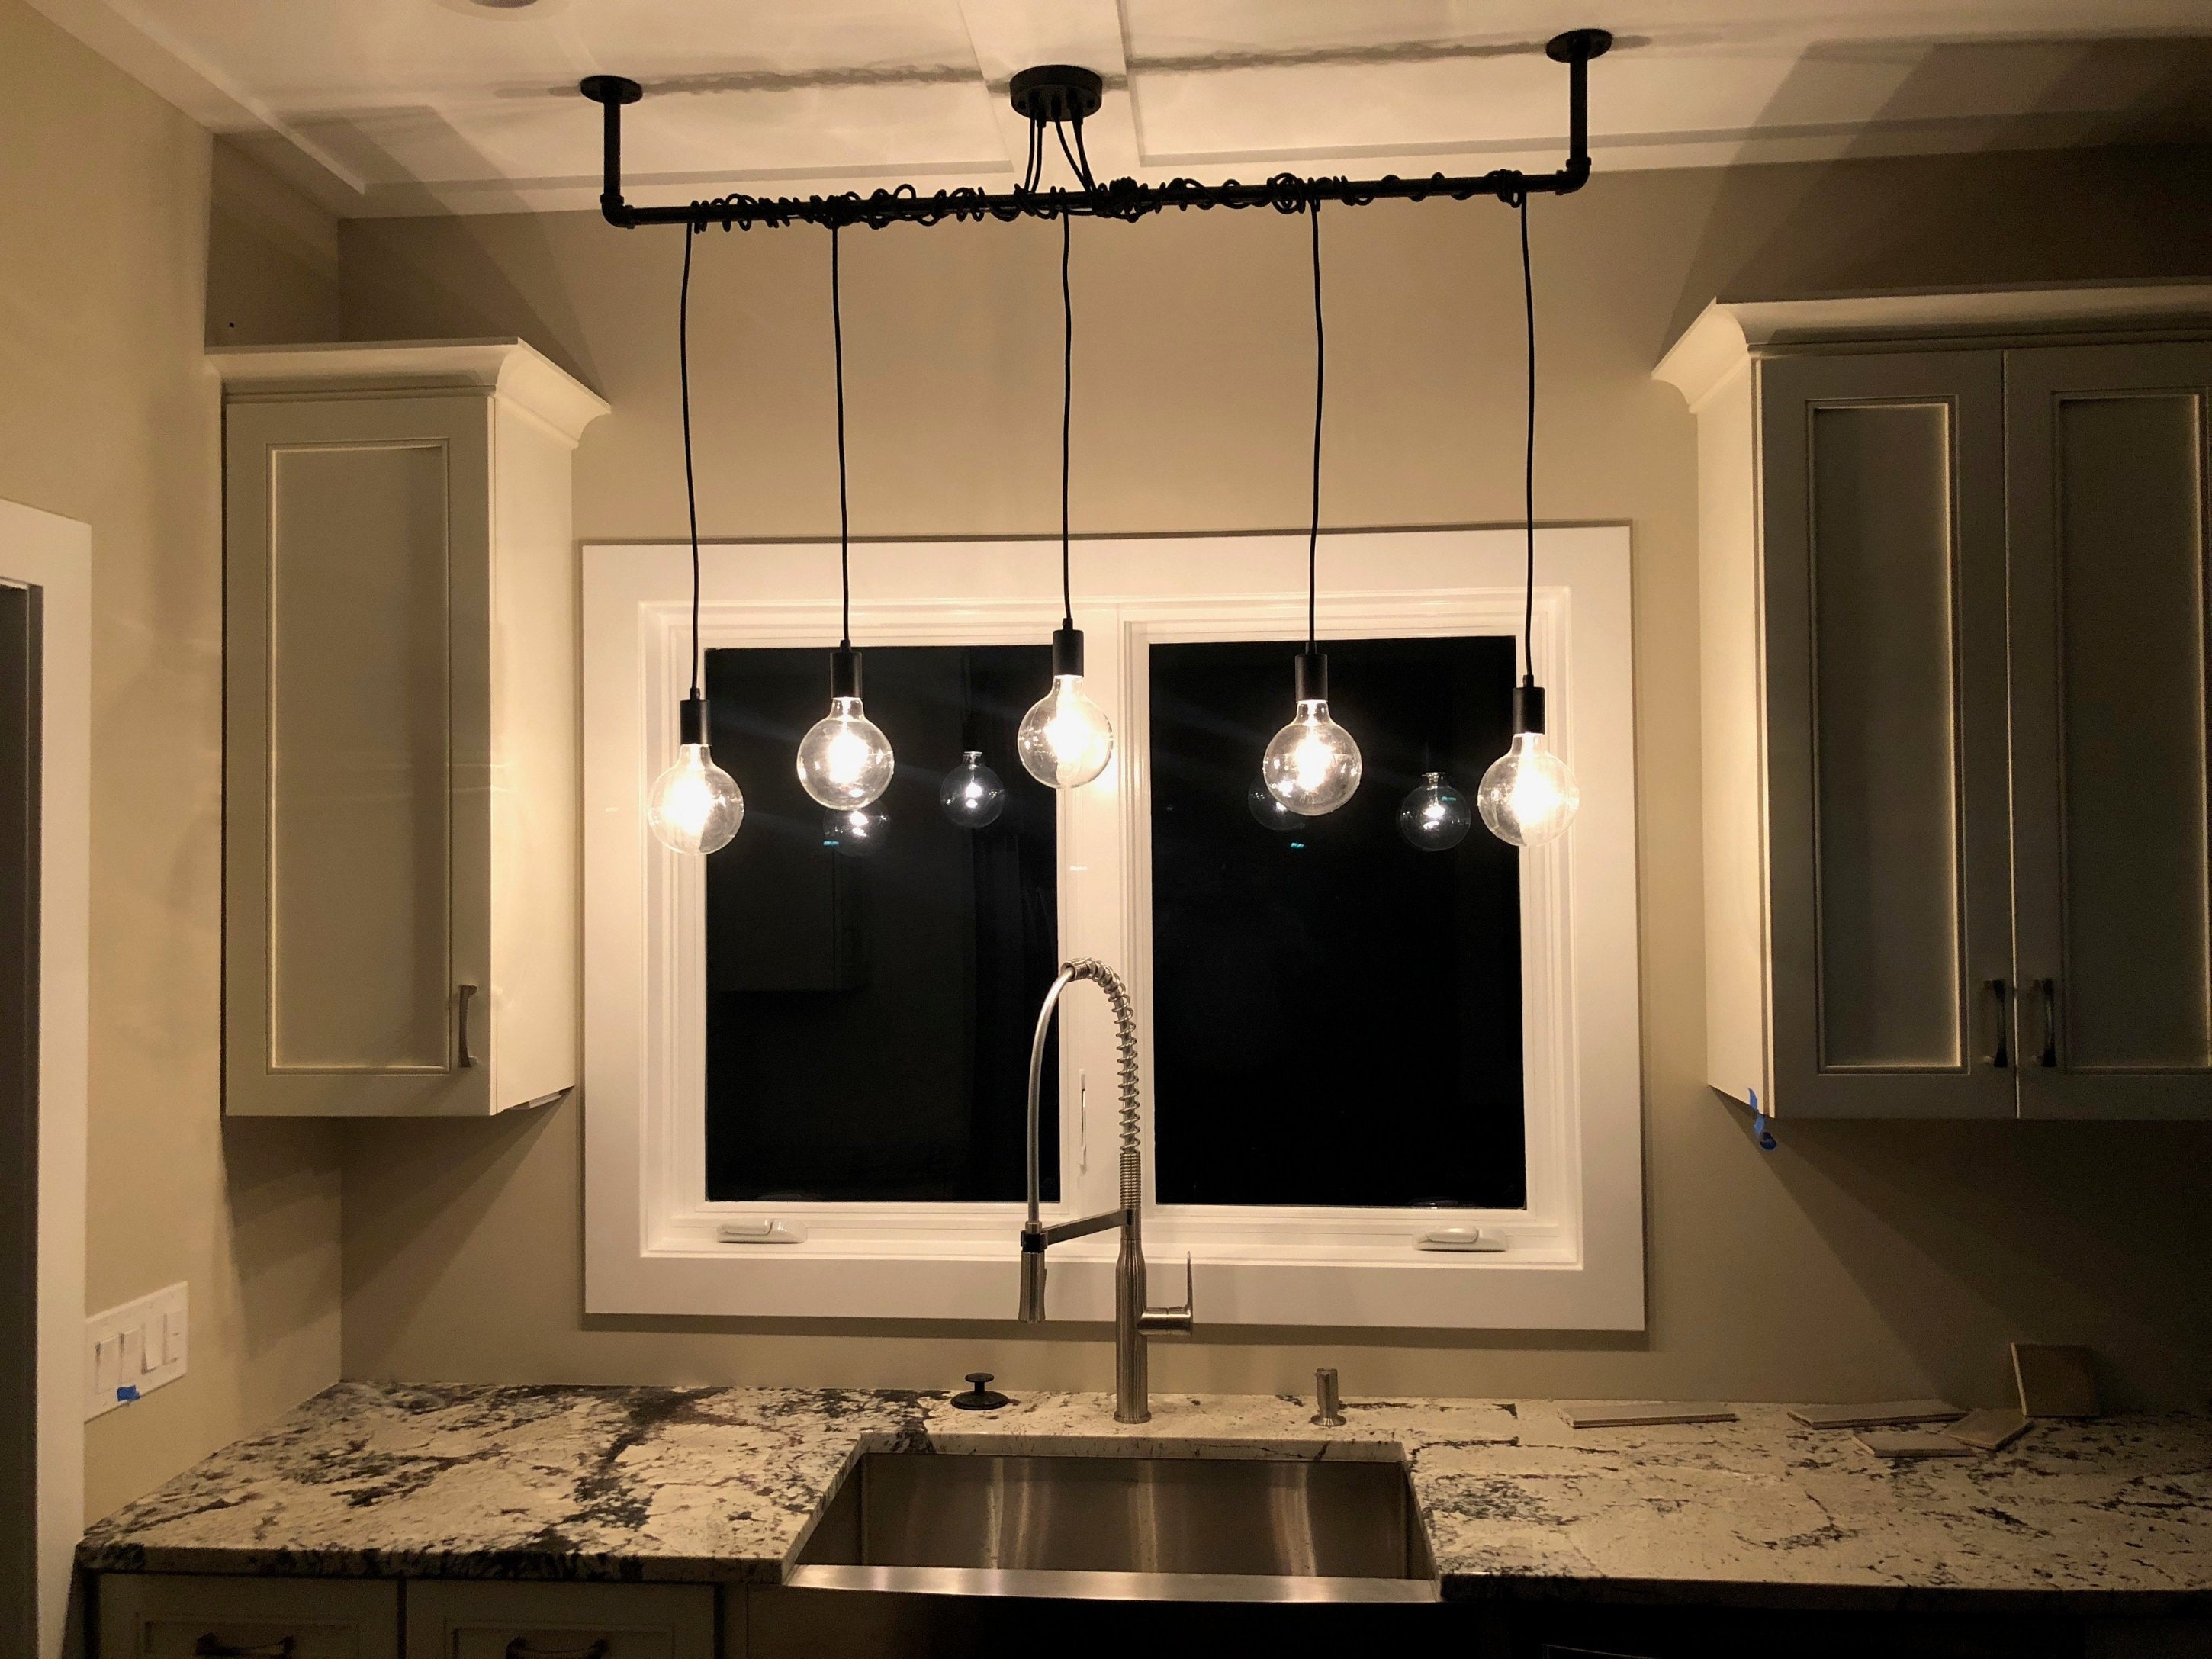 clear pendant lighting over kitchen sink